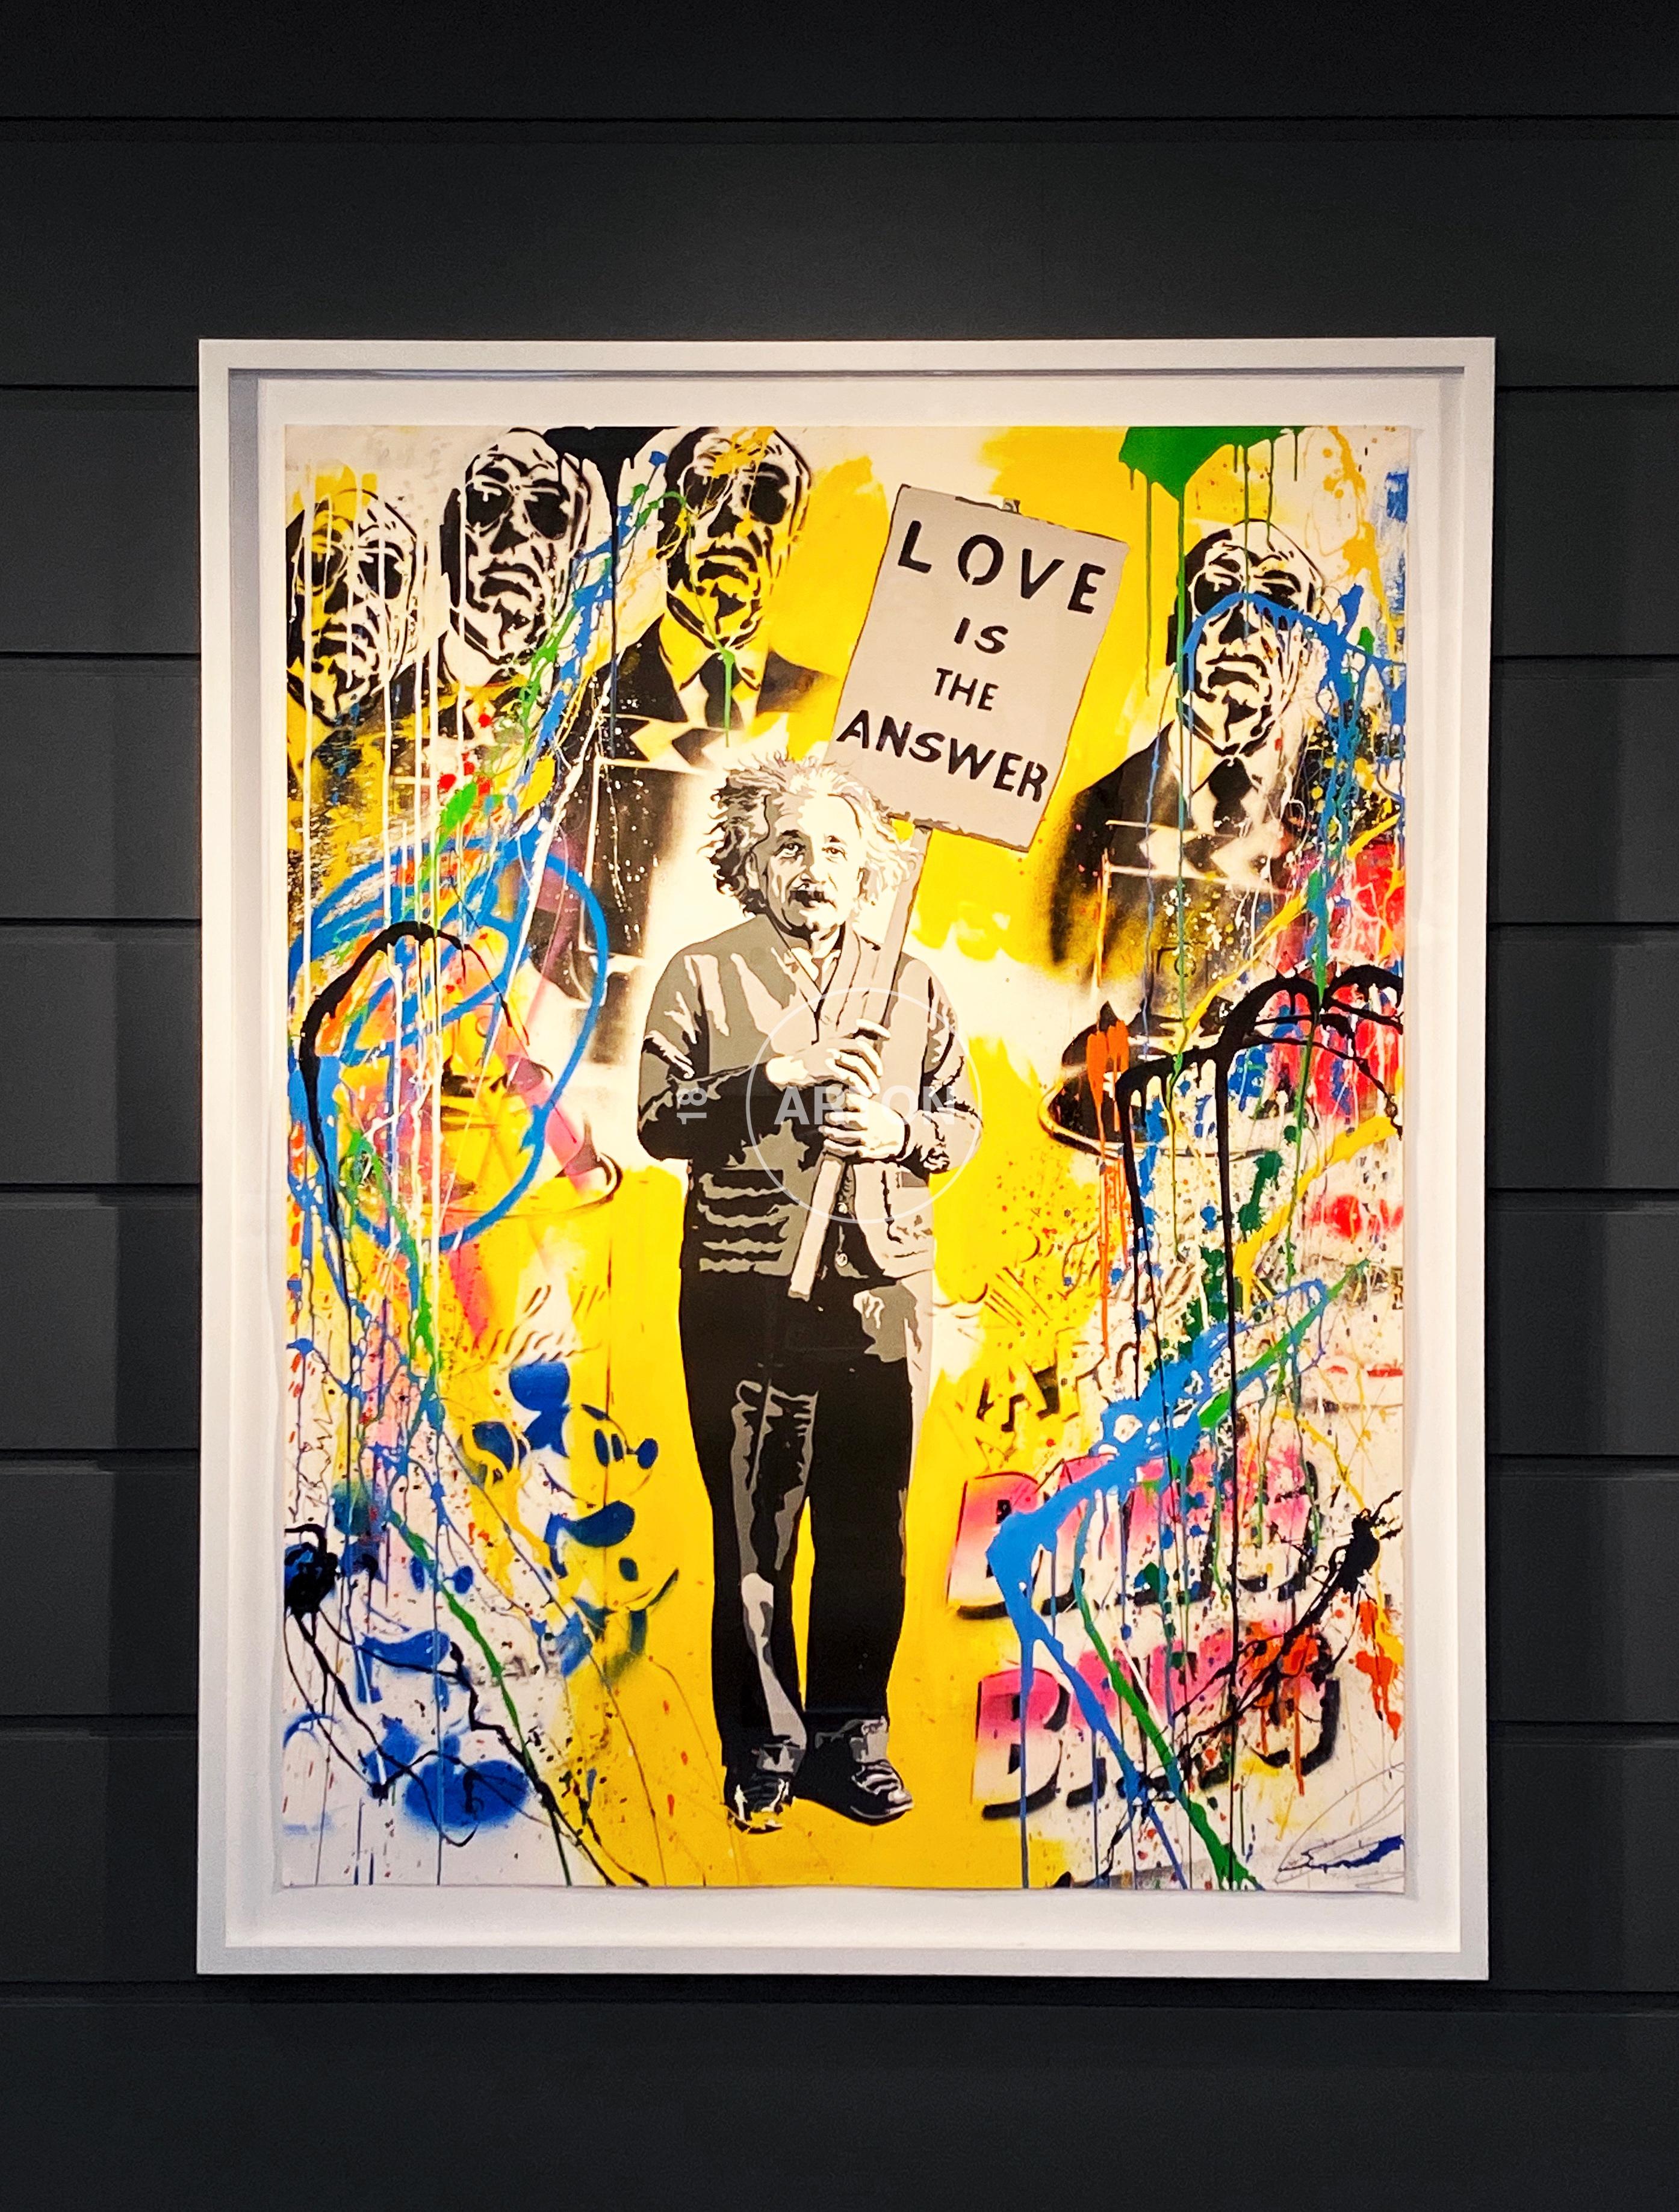 The 'Einstein' by french artist Mr. Brainwash was created in 2015 in the artist's signature style of layering paint, stencil, and a variety of mixed media on paper to create a treat of cultural commentary. This piece is a one-of-a-kind unique, with